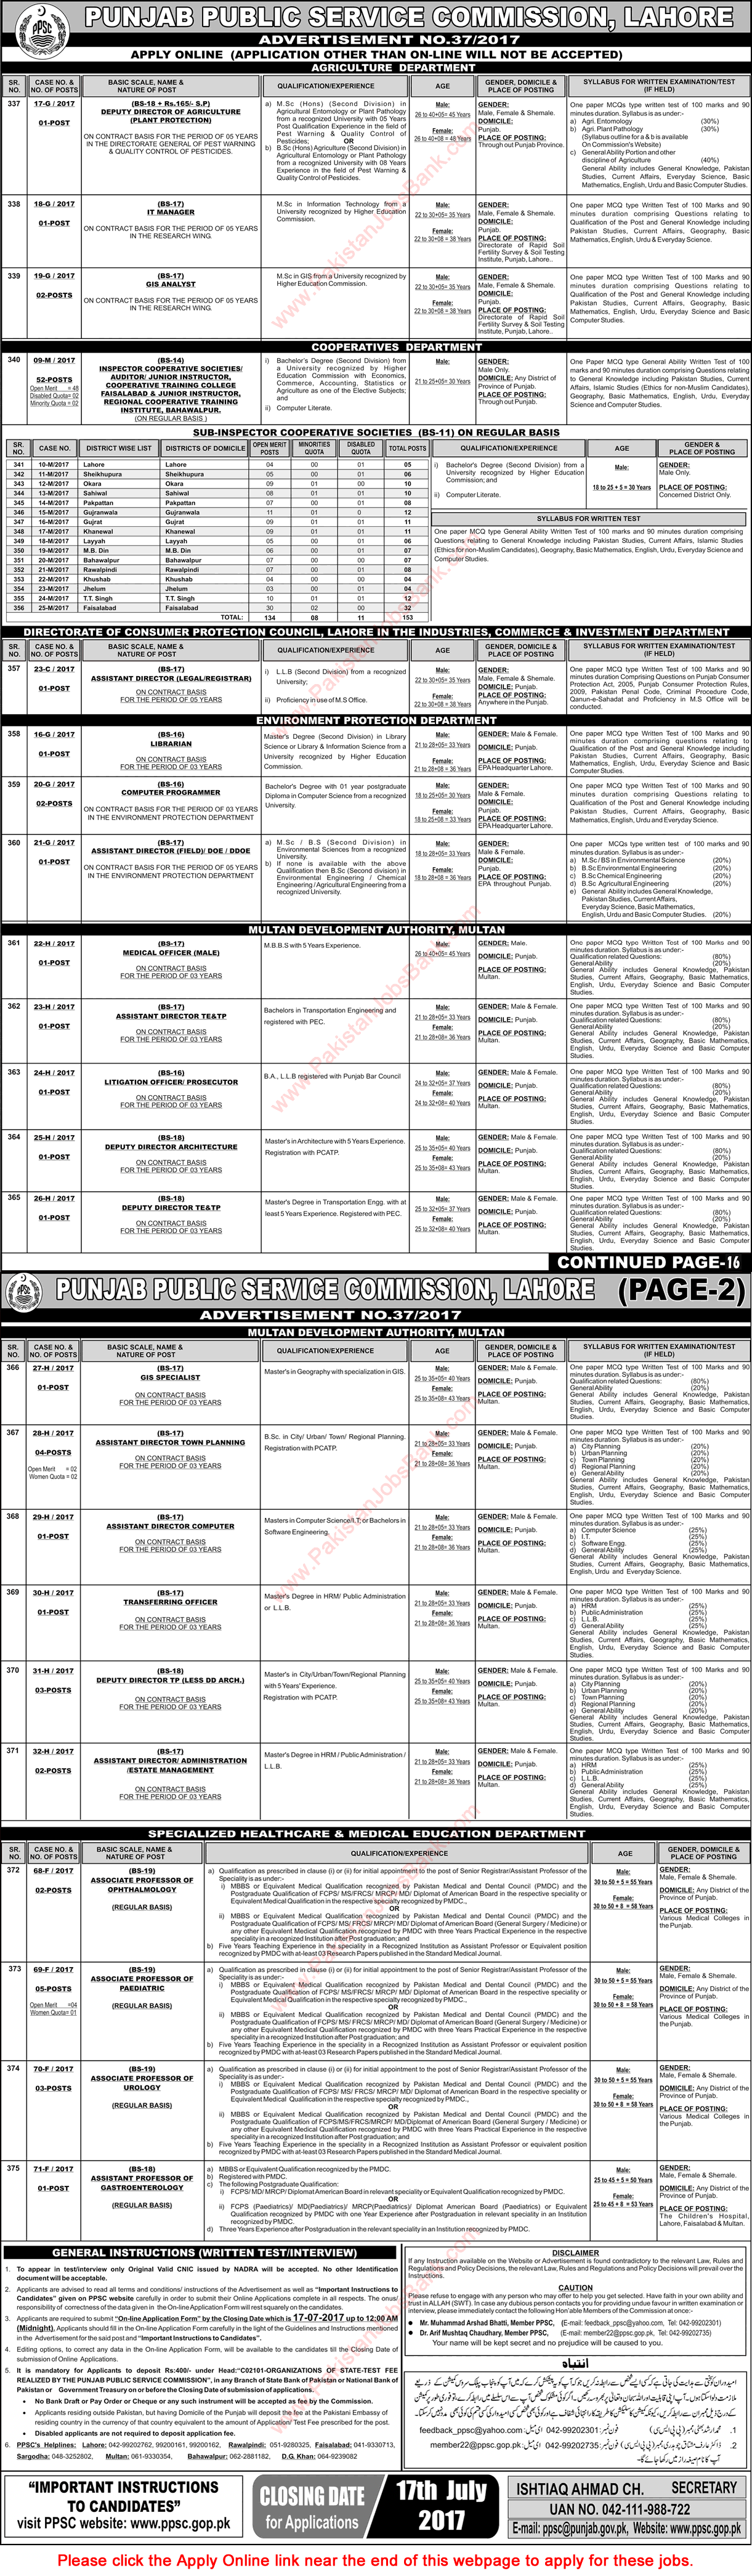 PPSC Jobs July 2017 Apply Online Consolidated Advertisement No 37/2017 Latest